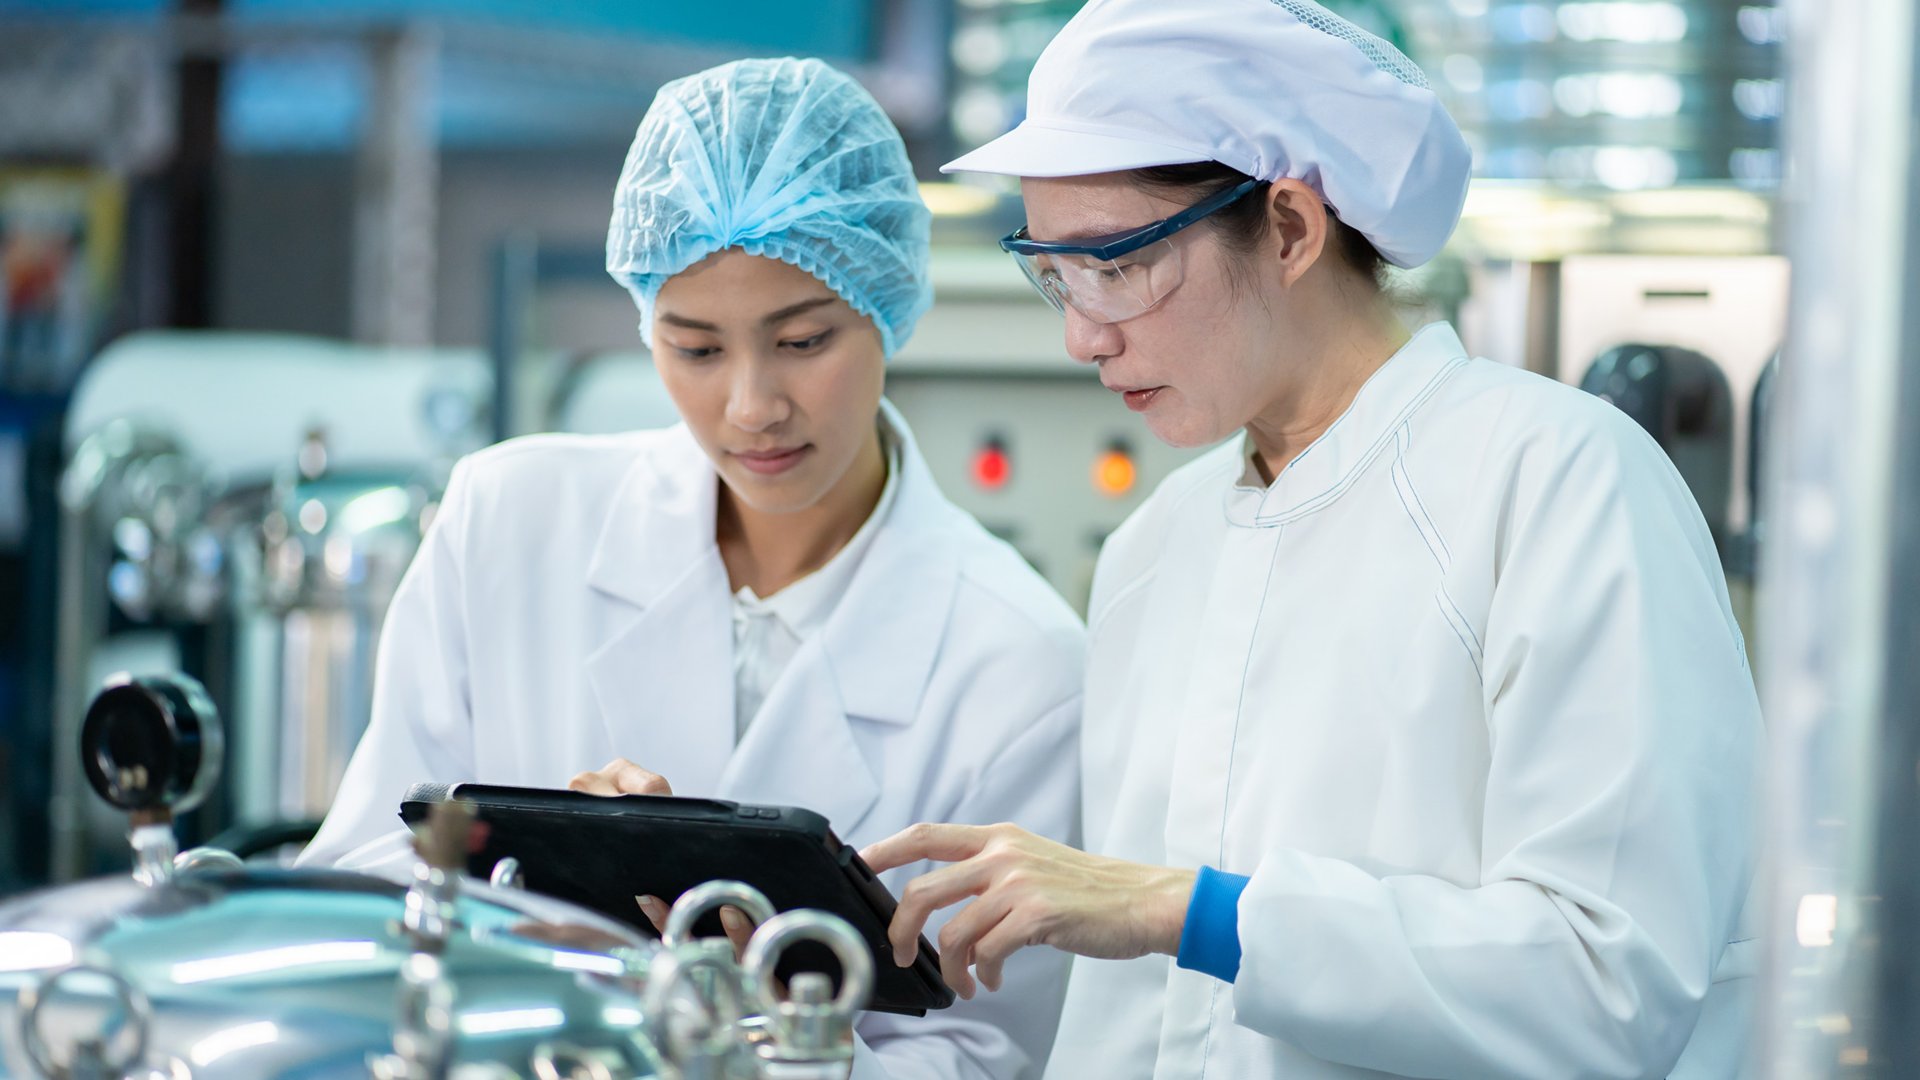 Two workiers looking at tablet in food and beverage facility